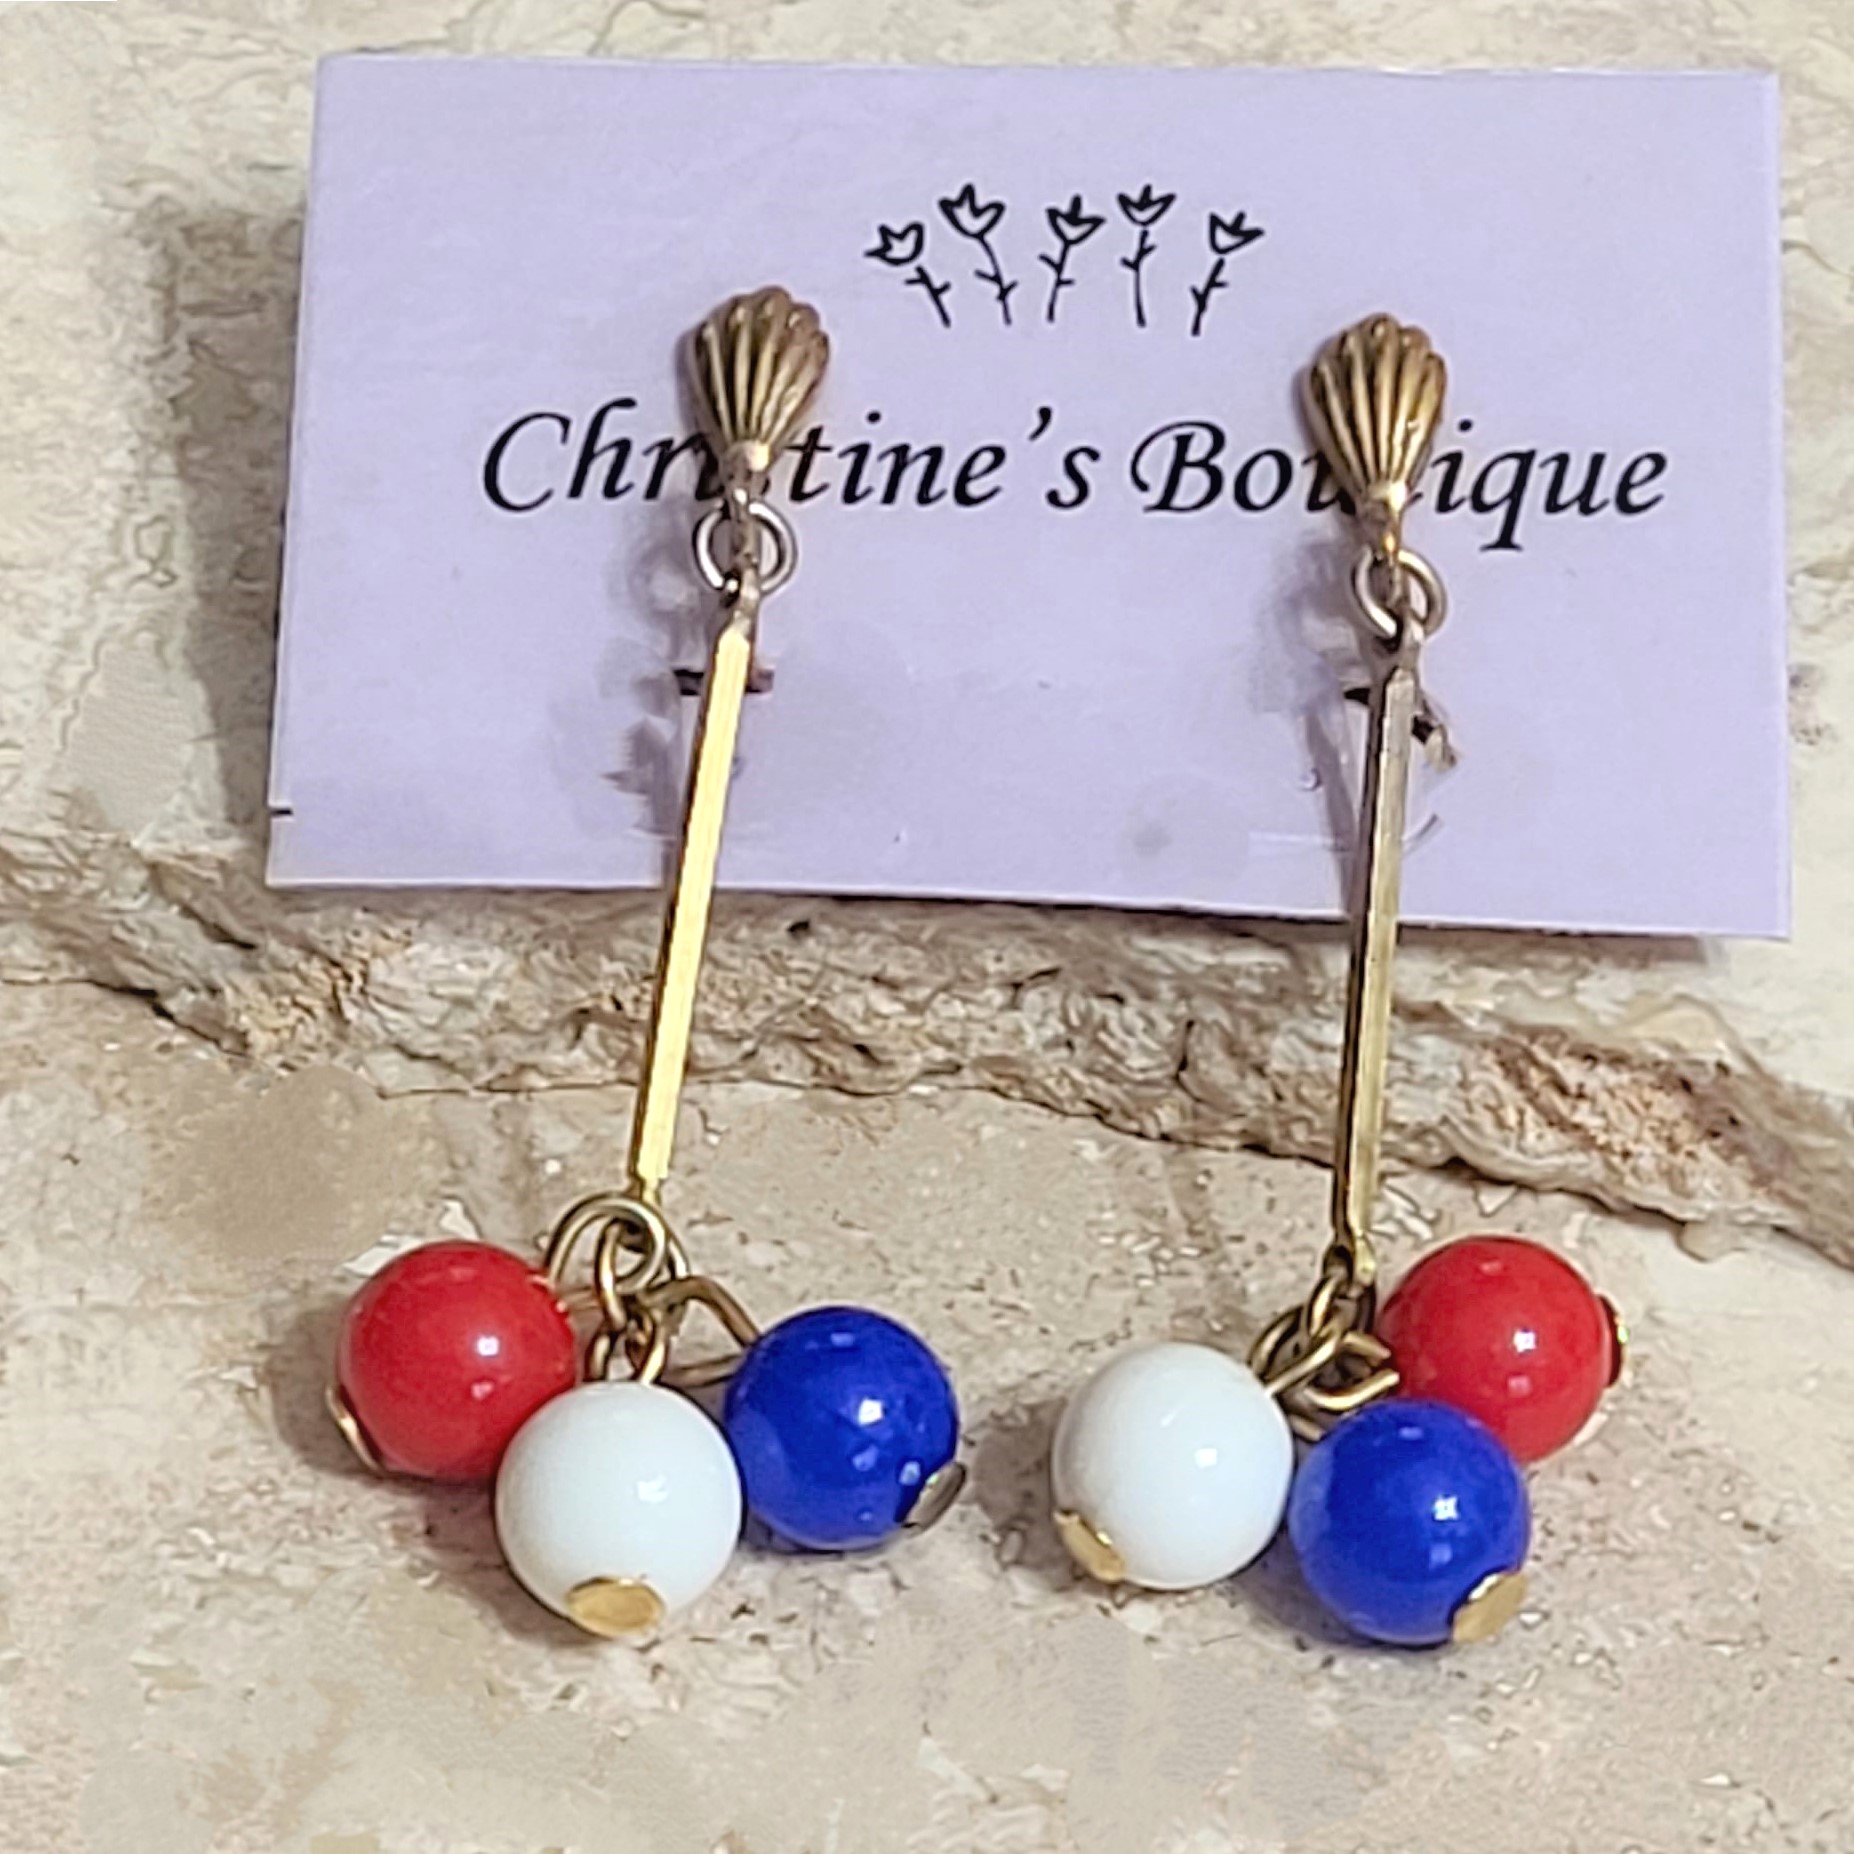 Festive patriotic earrings, red, white and blue, vintage clip on earrings